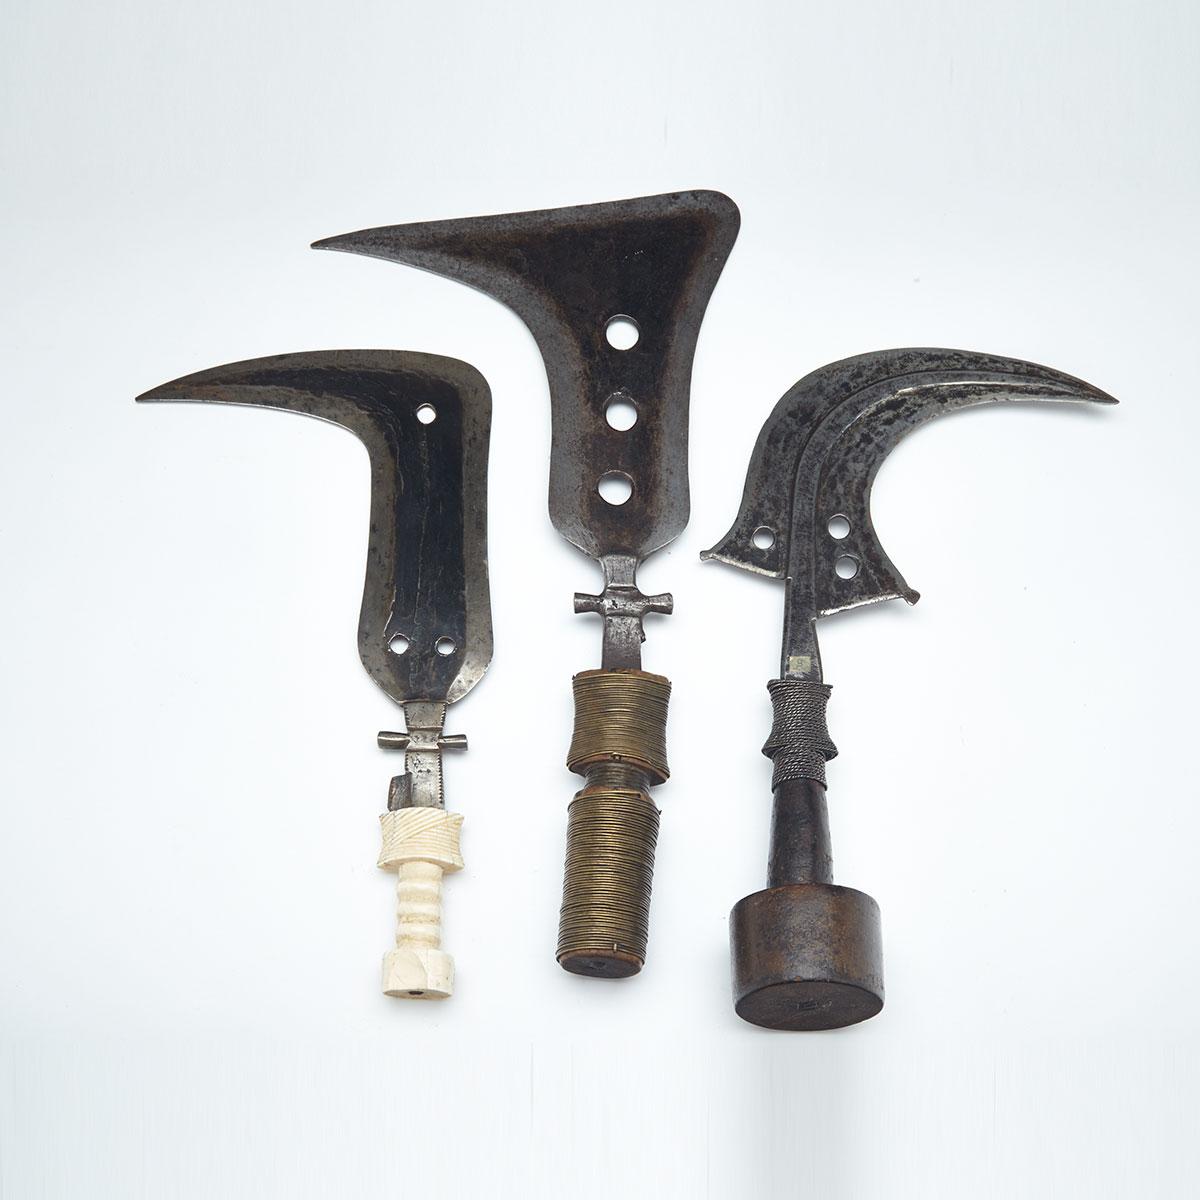 Three African Mangbetu Sickle Knives, late 19th/early 20th century